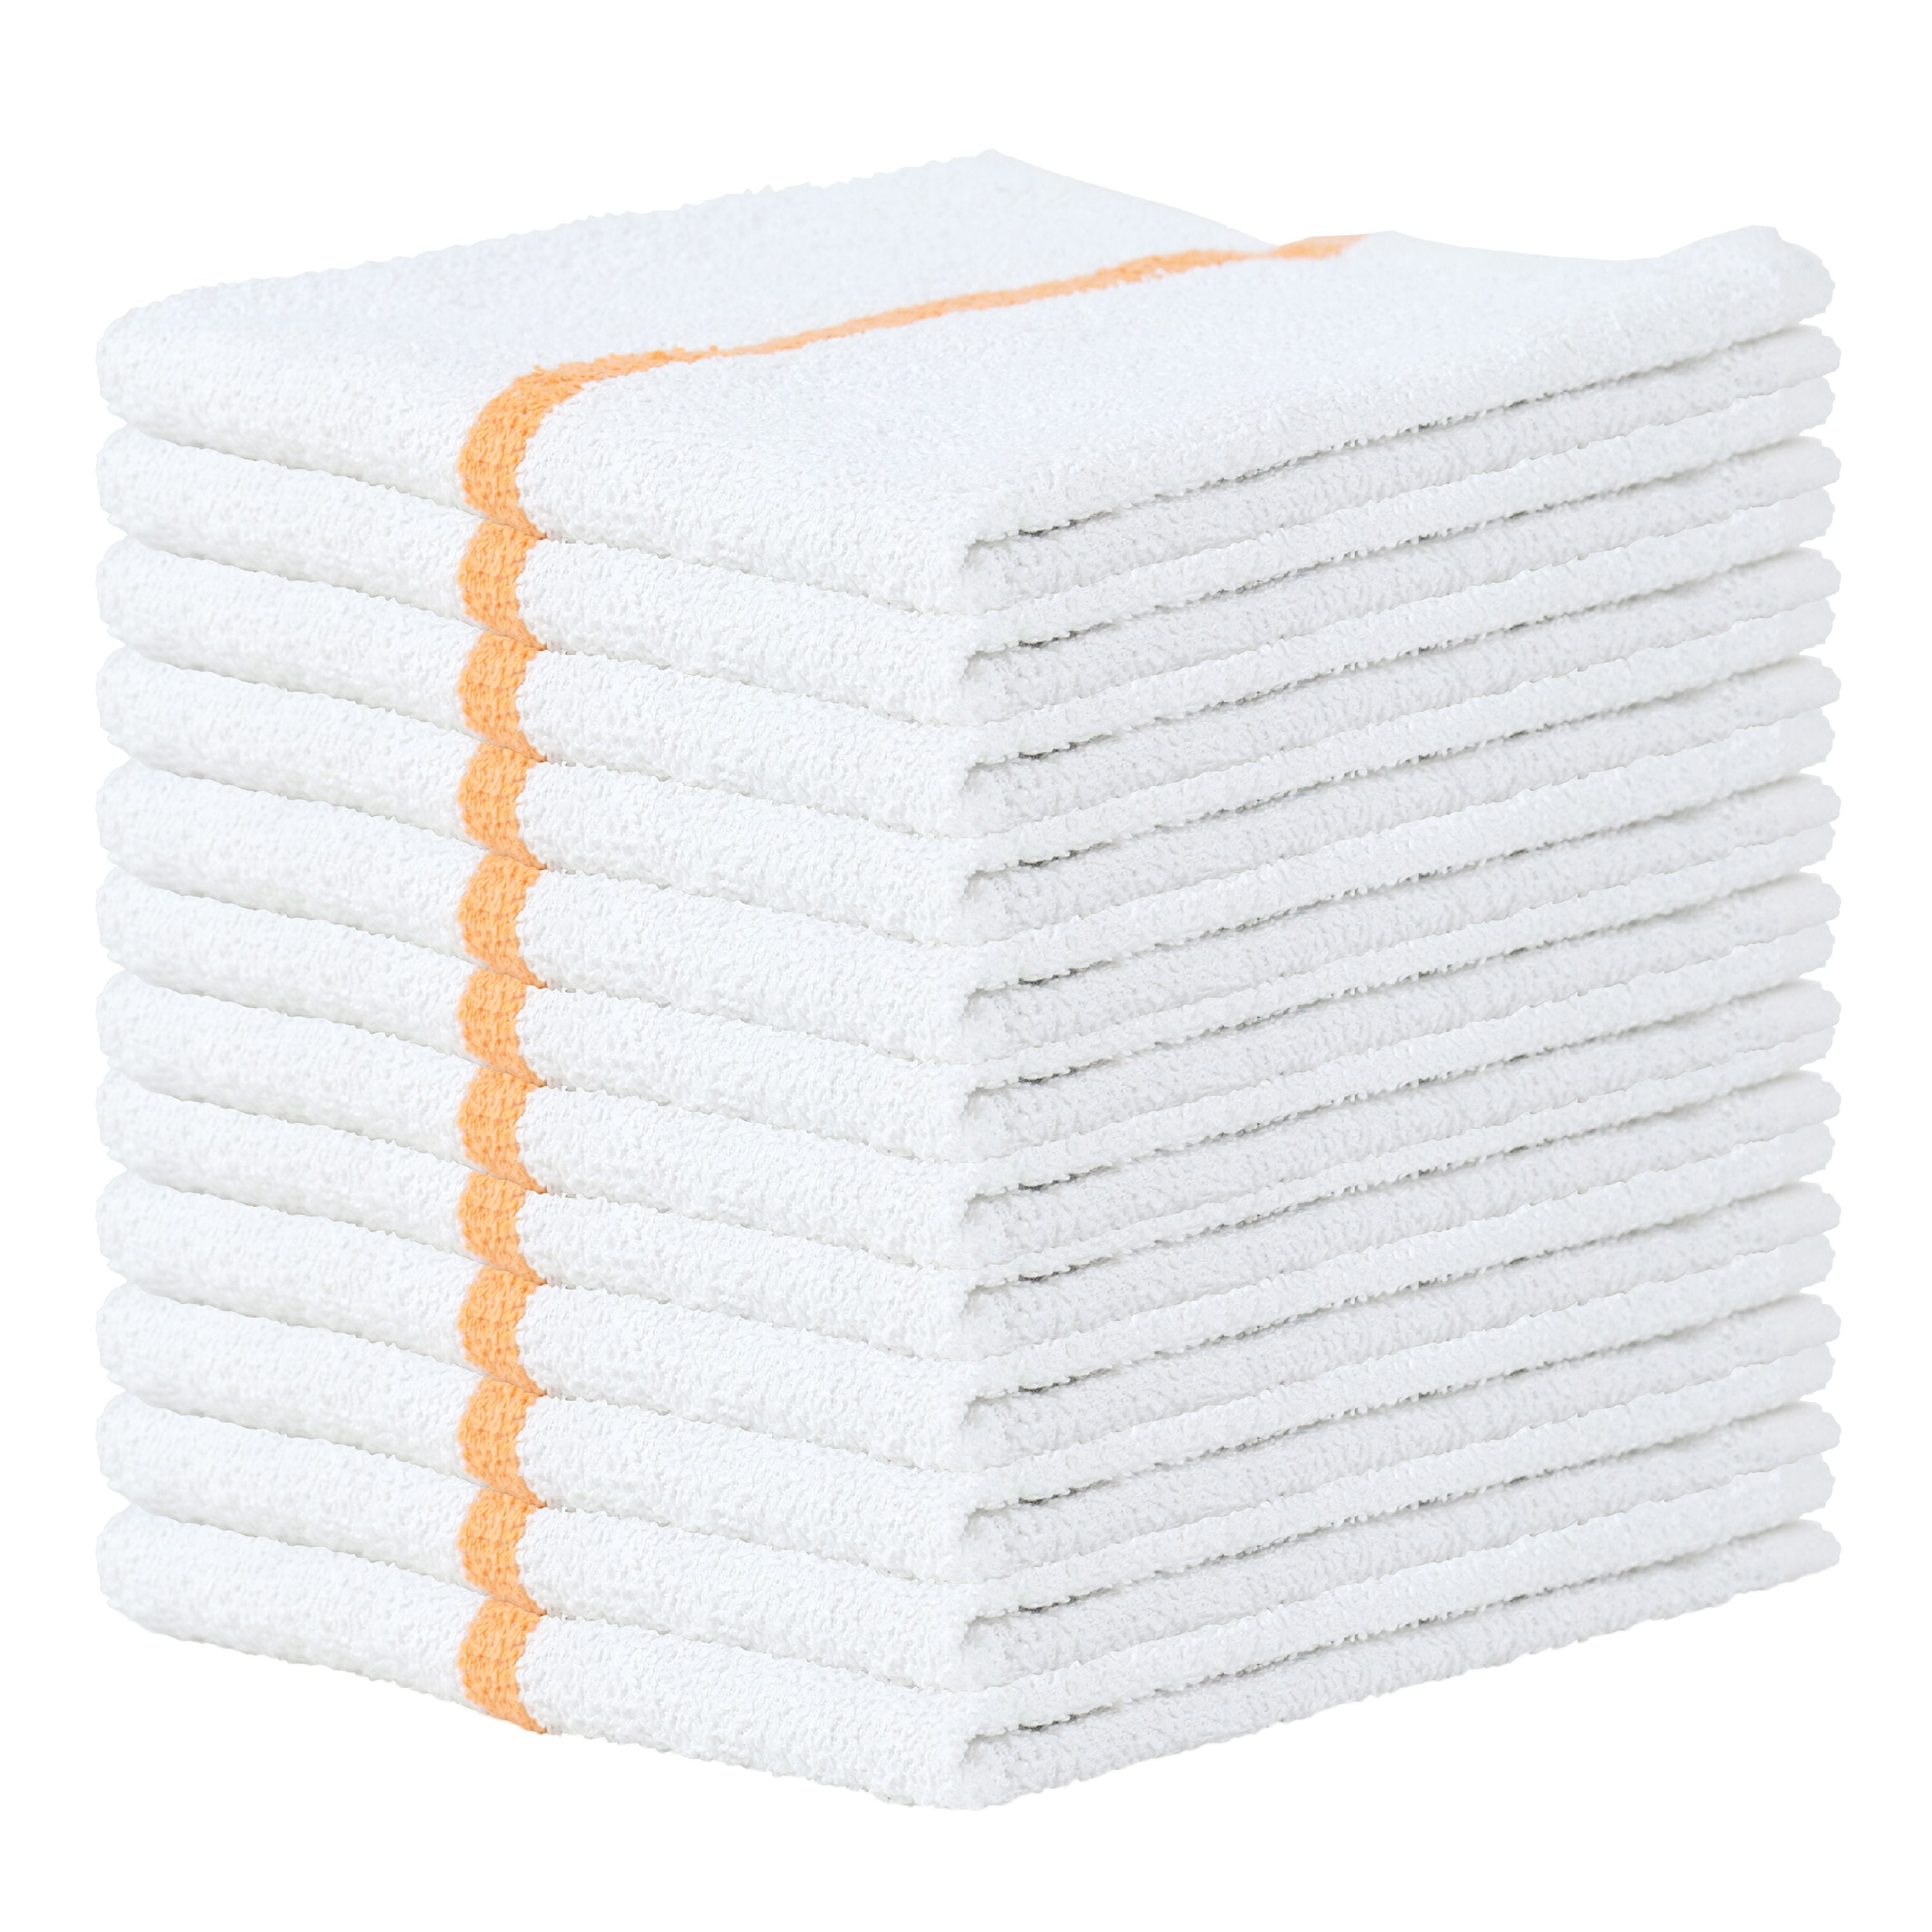 Choice 16 x 19 24 oz. White Cotton Textured Terry Bar Towels in